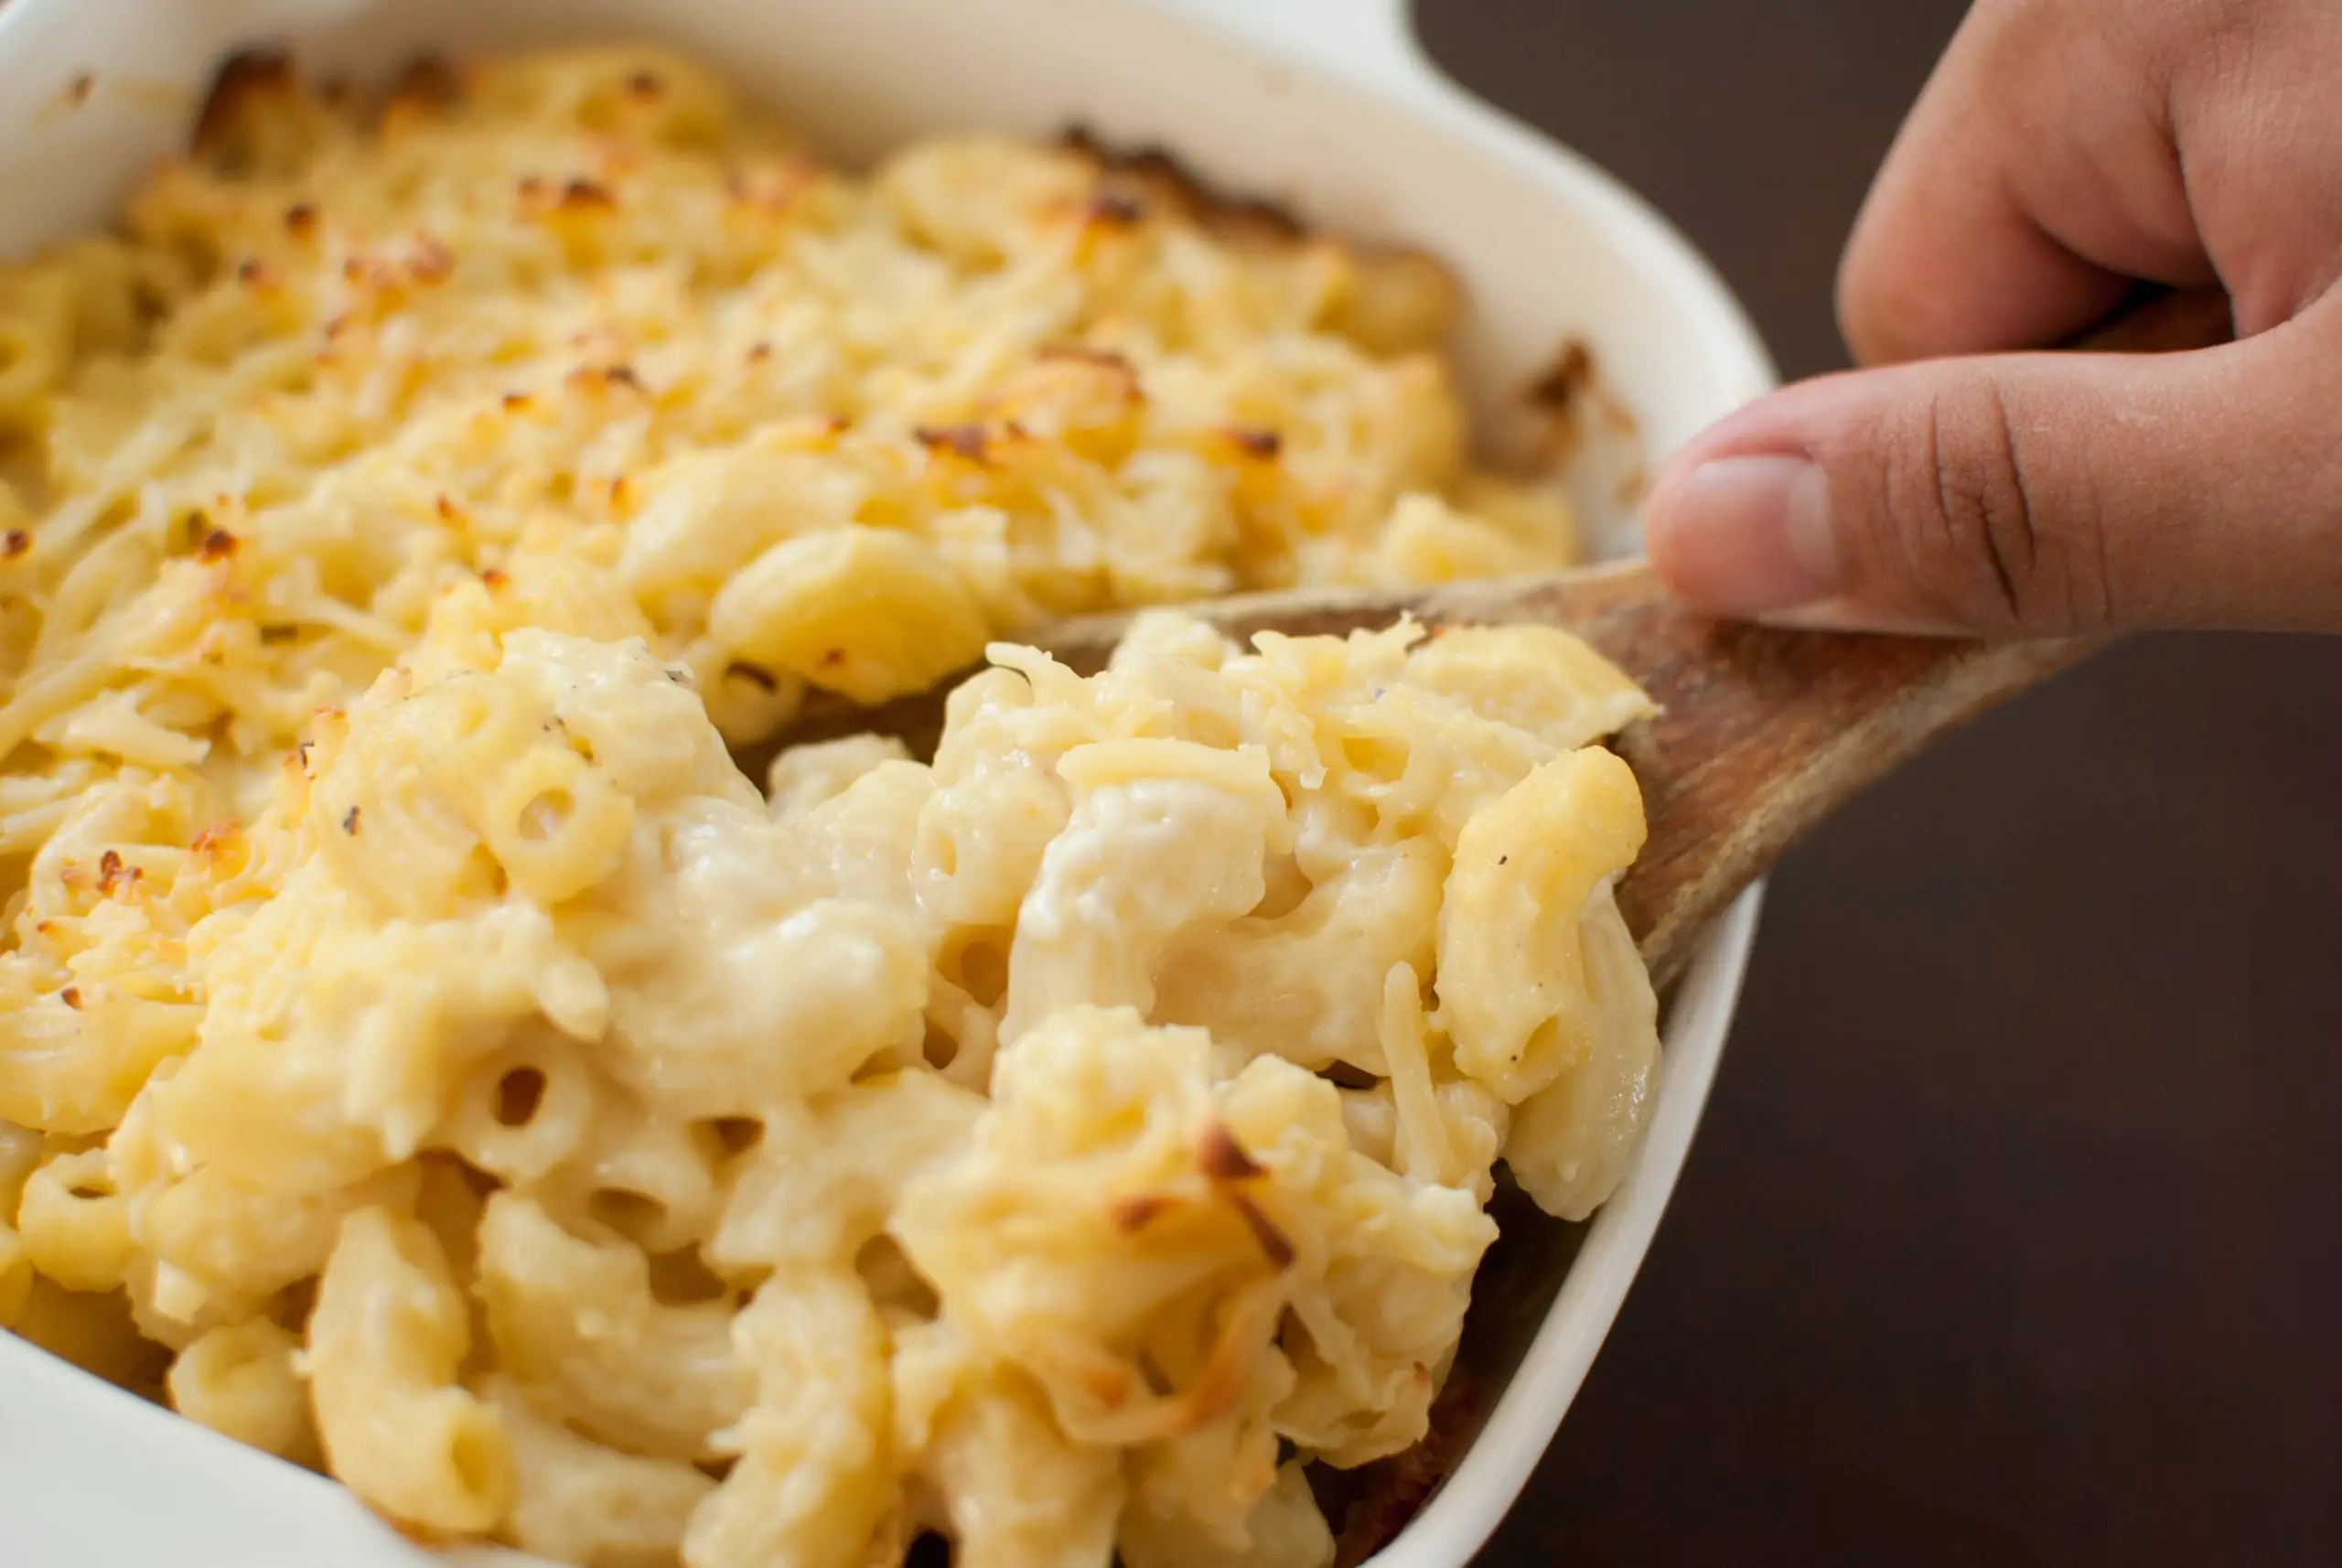 How to Make Old Style Macaroni and Cheese: 8 Steps